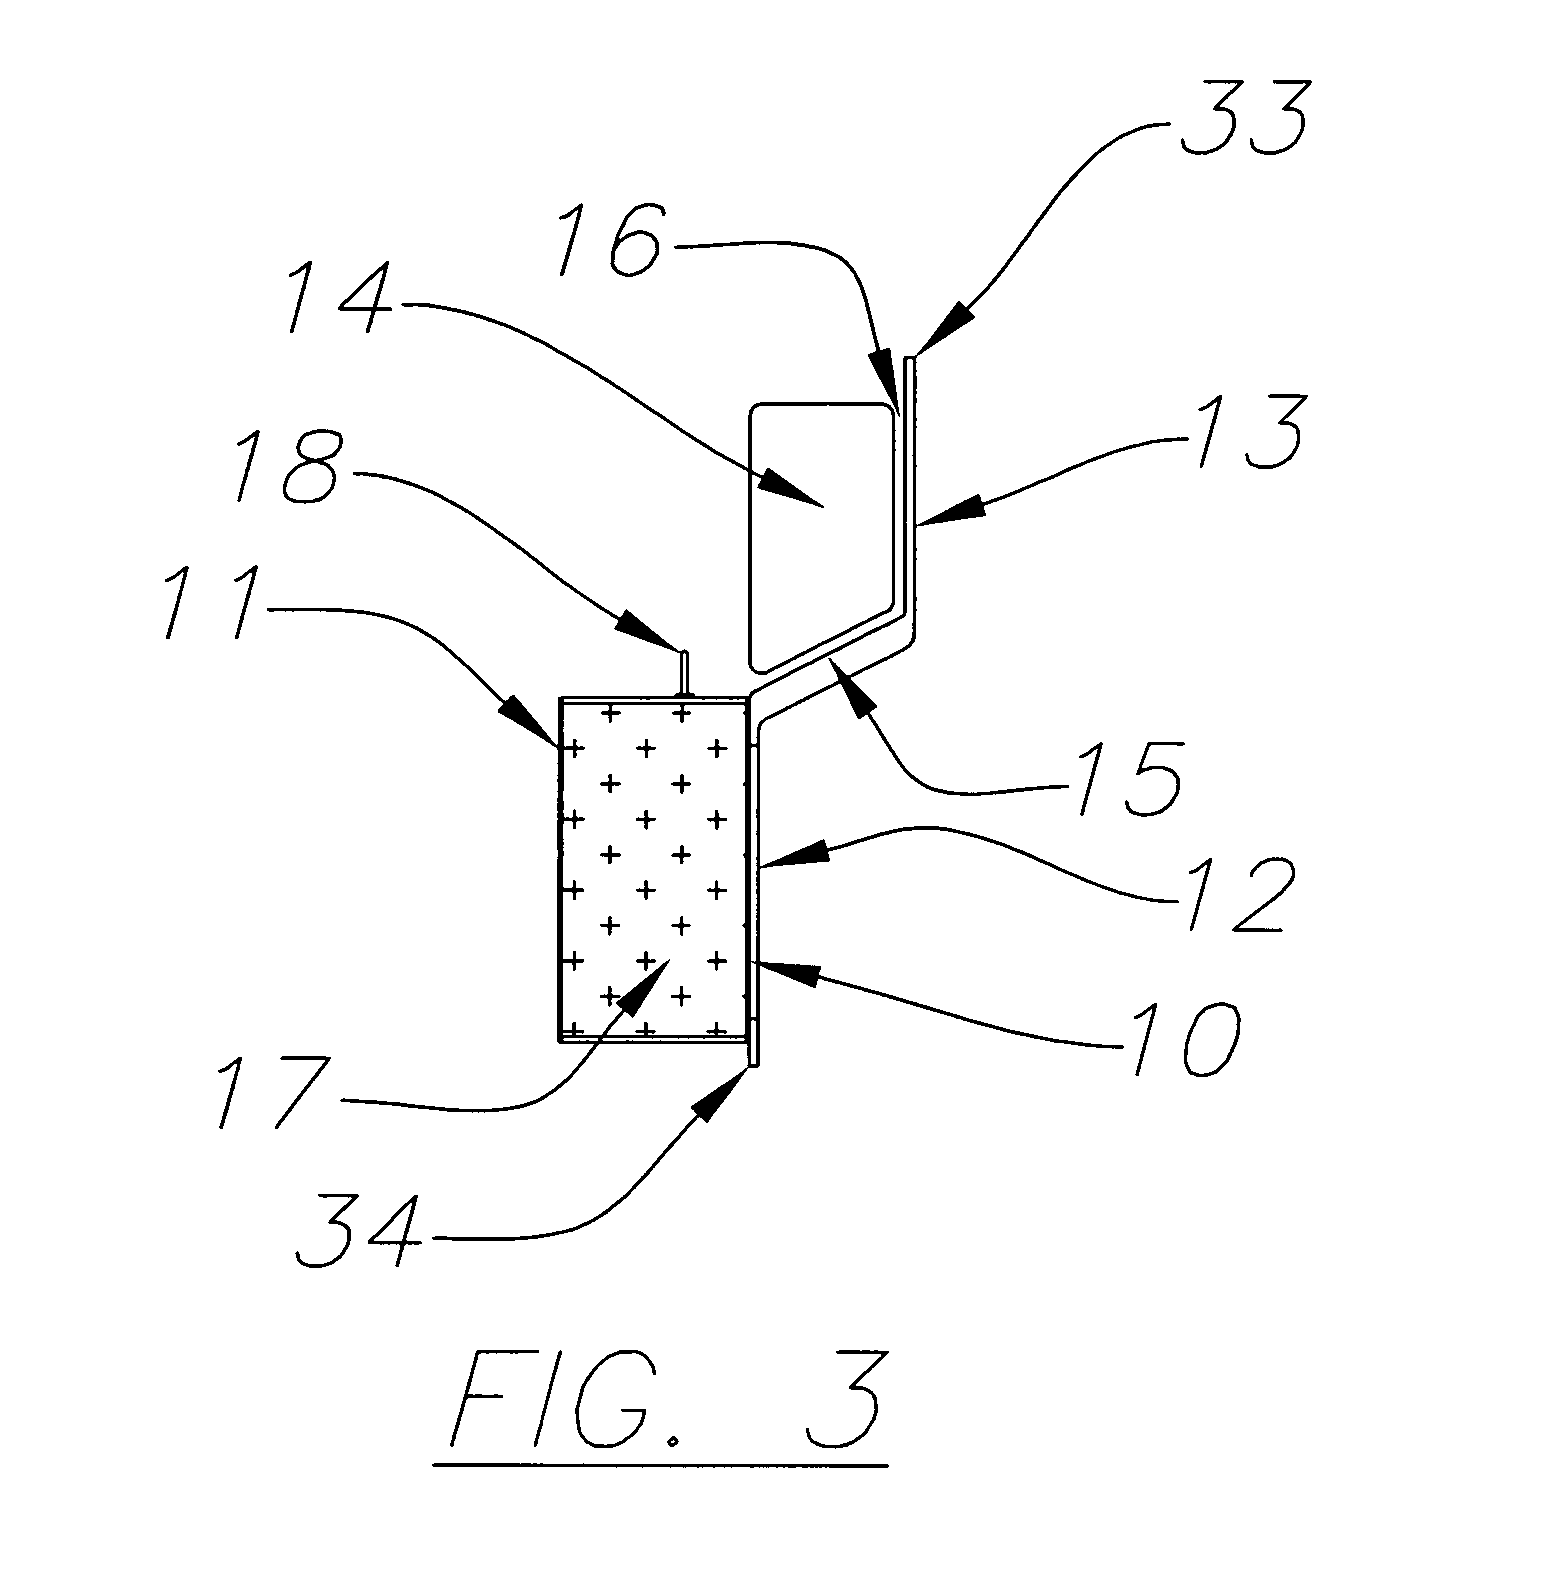 Floating skimmer and filter apparatus